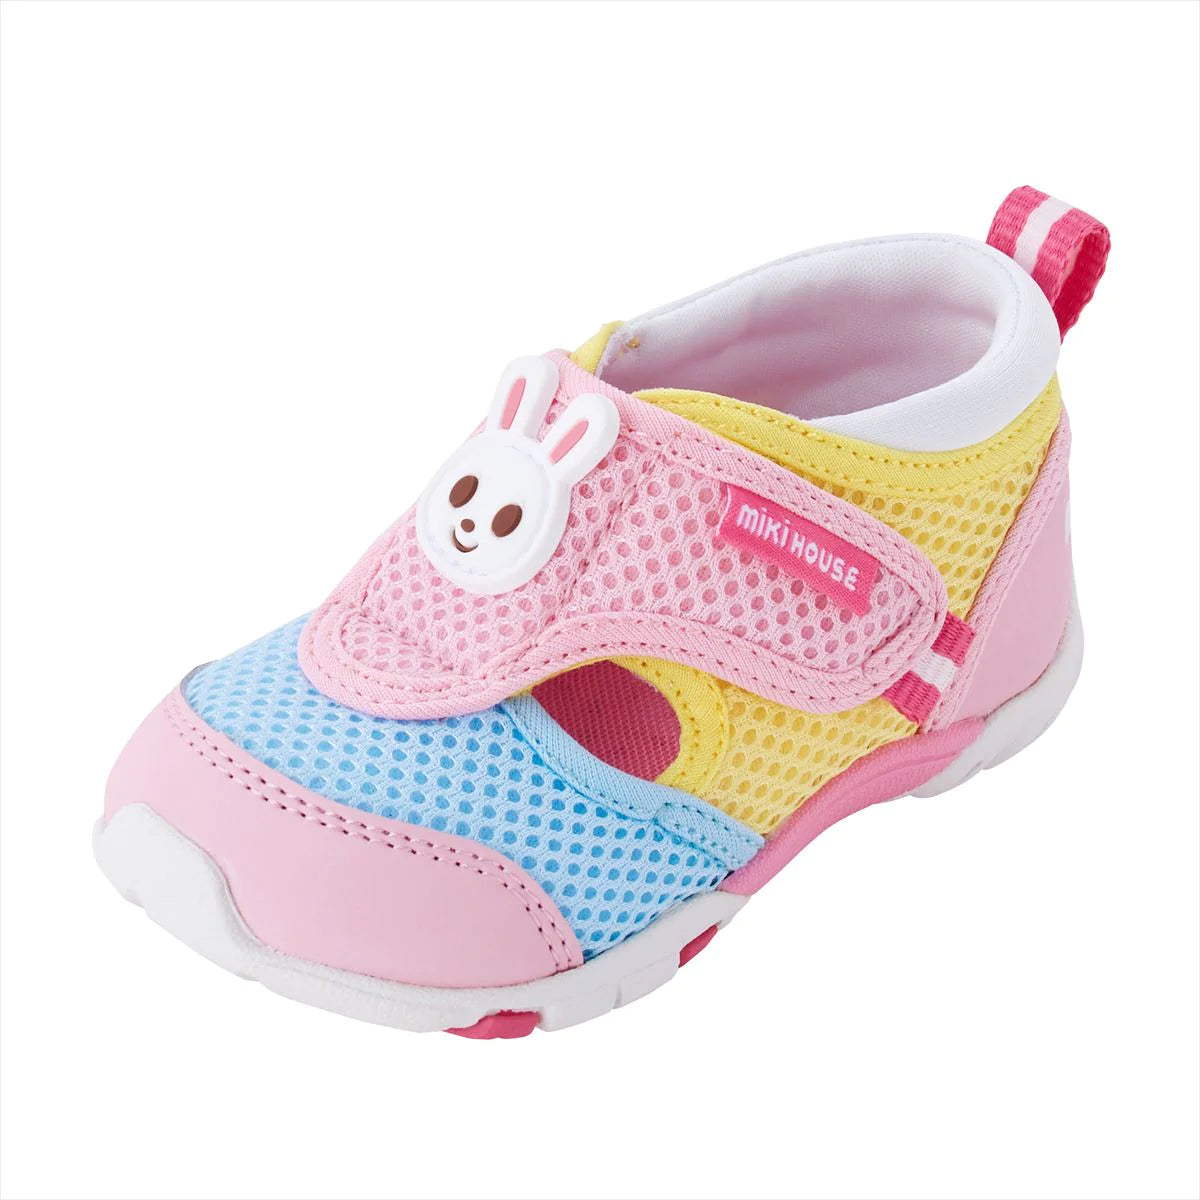 Double Russell Sneakers for Kids - Power Pop